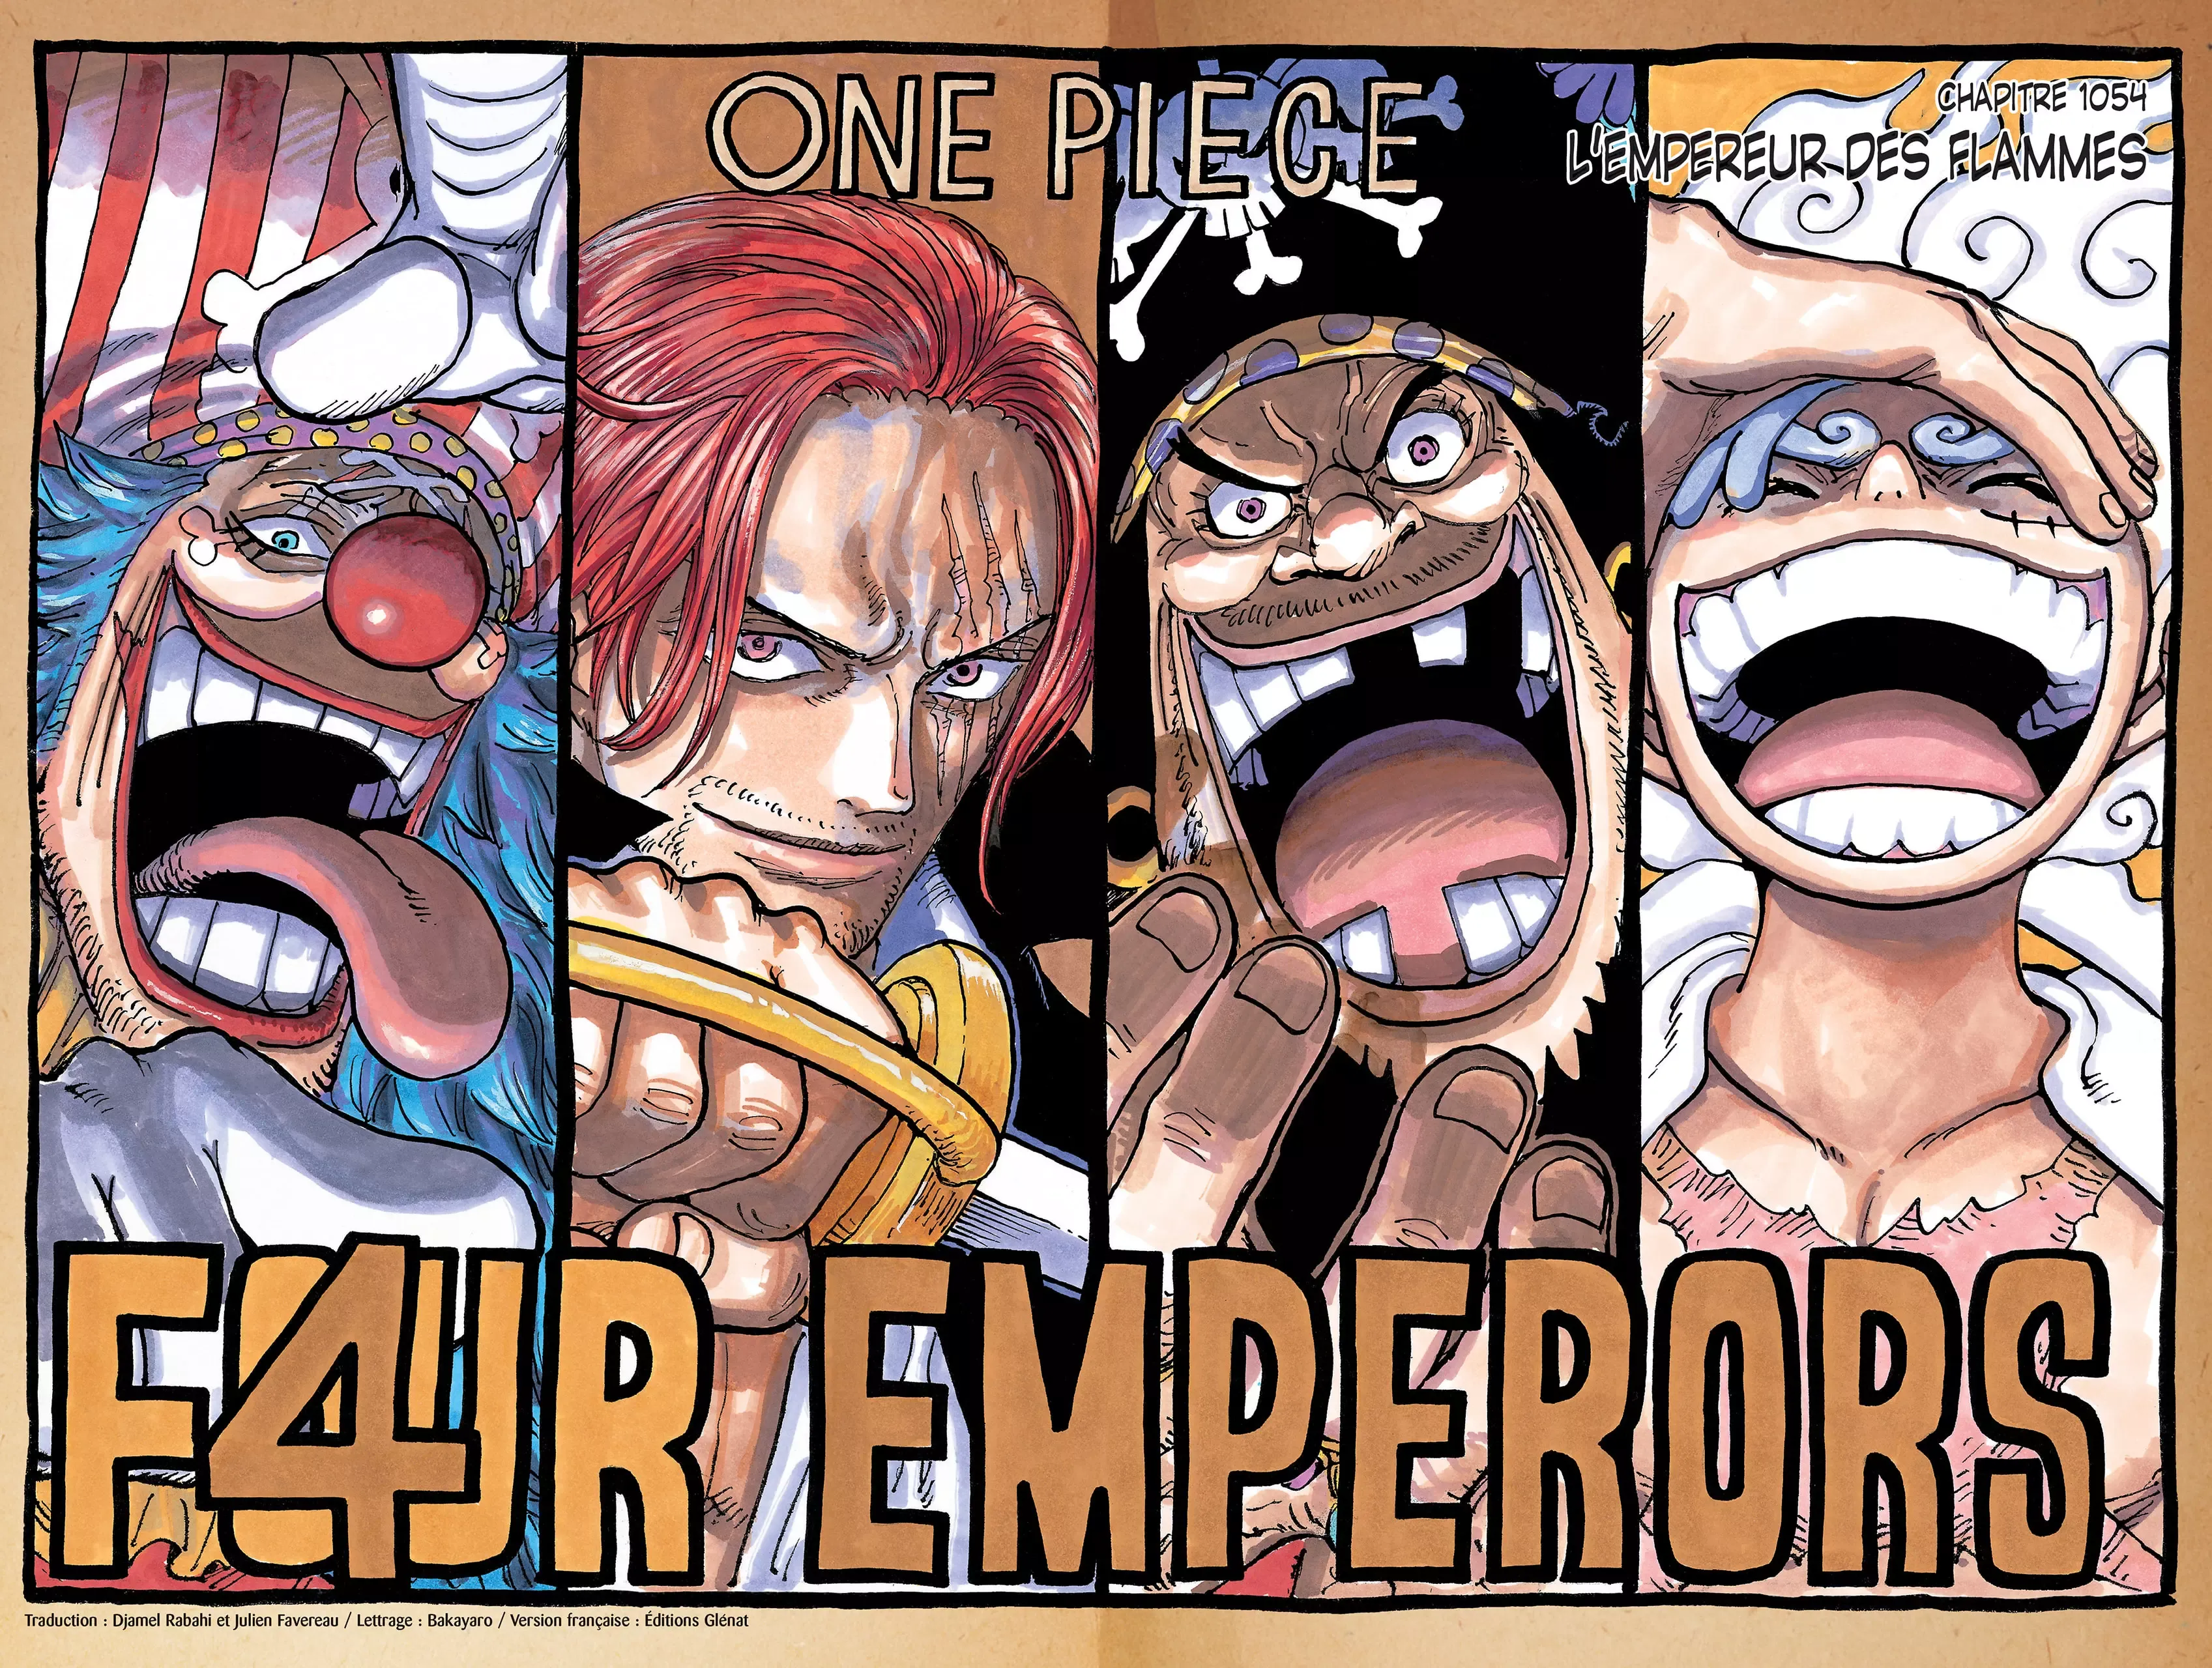 One Piece: Chapter chapitre-1054 - Page 1